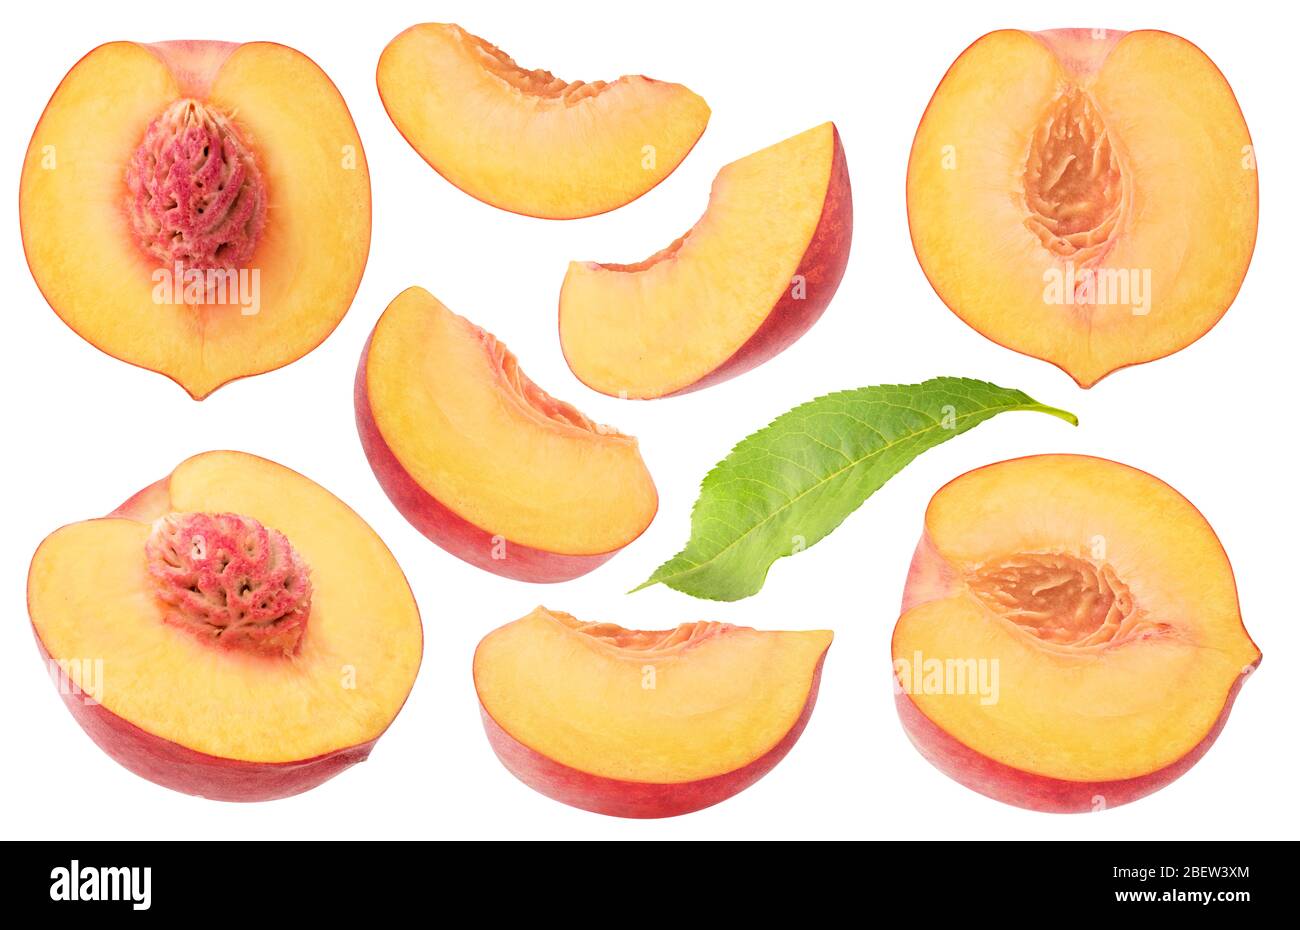 Isolated peaches collection. Pieces of fresh peach fruits of different shapes isolated on white background Stock Photo